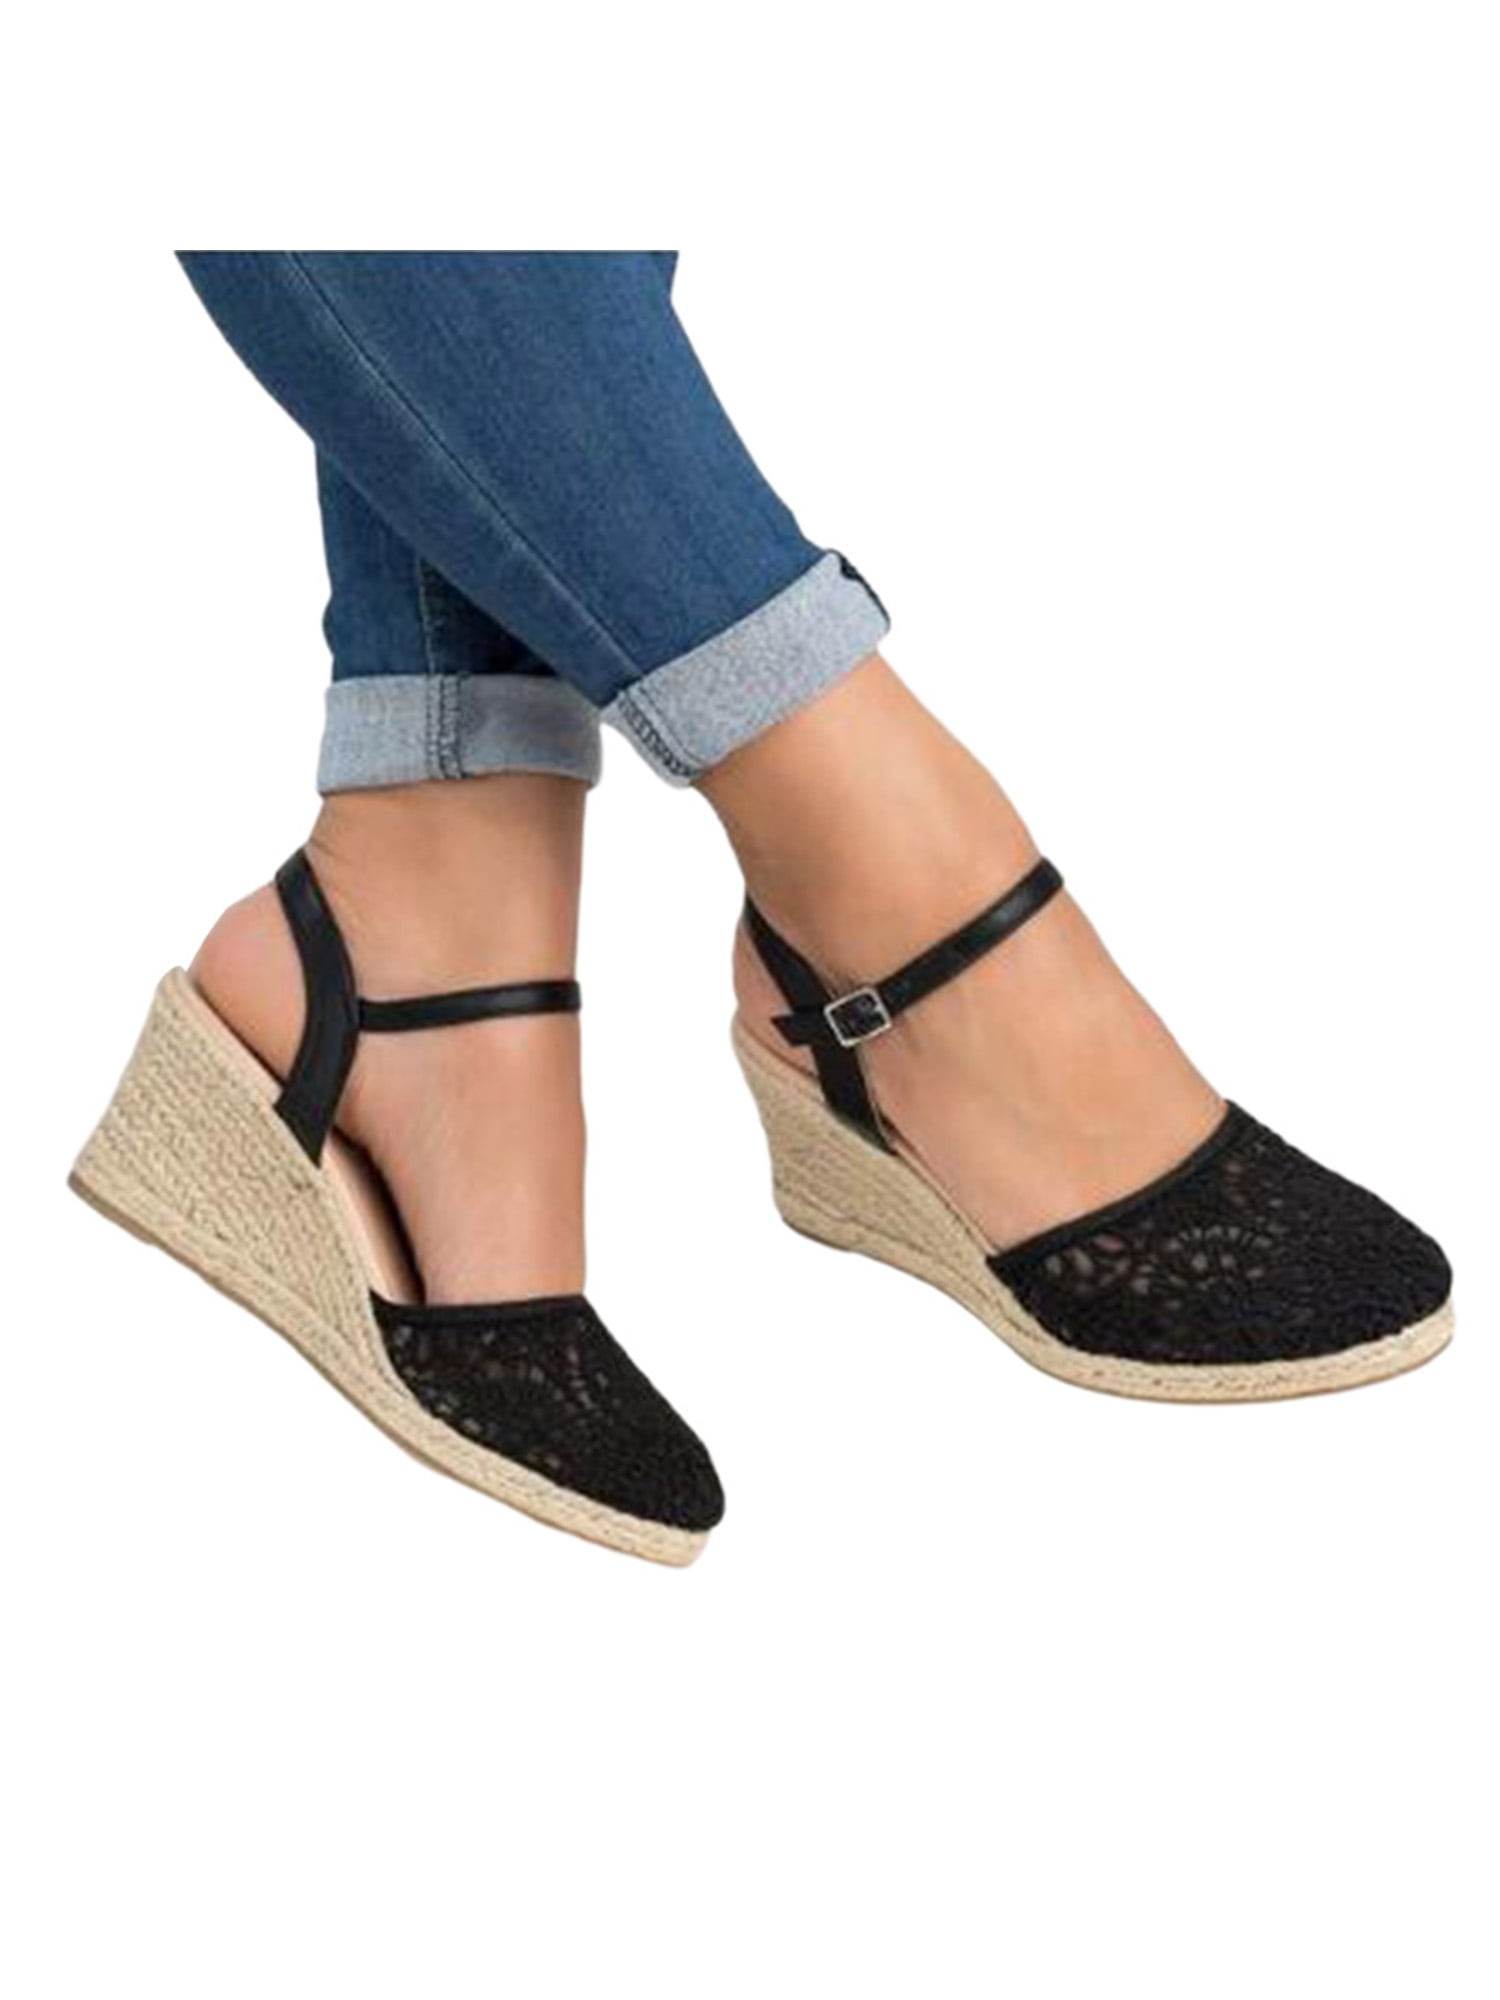 WOMENS LADIES ESPADRILLES ANKLE BUCKLE STRAP SUMMER WEDGE SANDALS SHOES